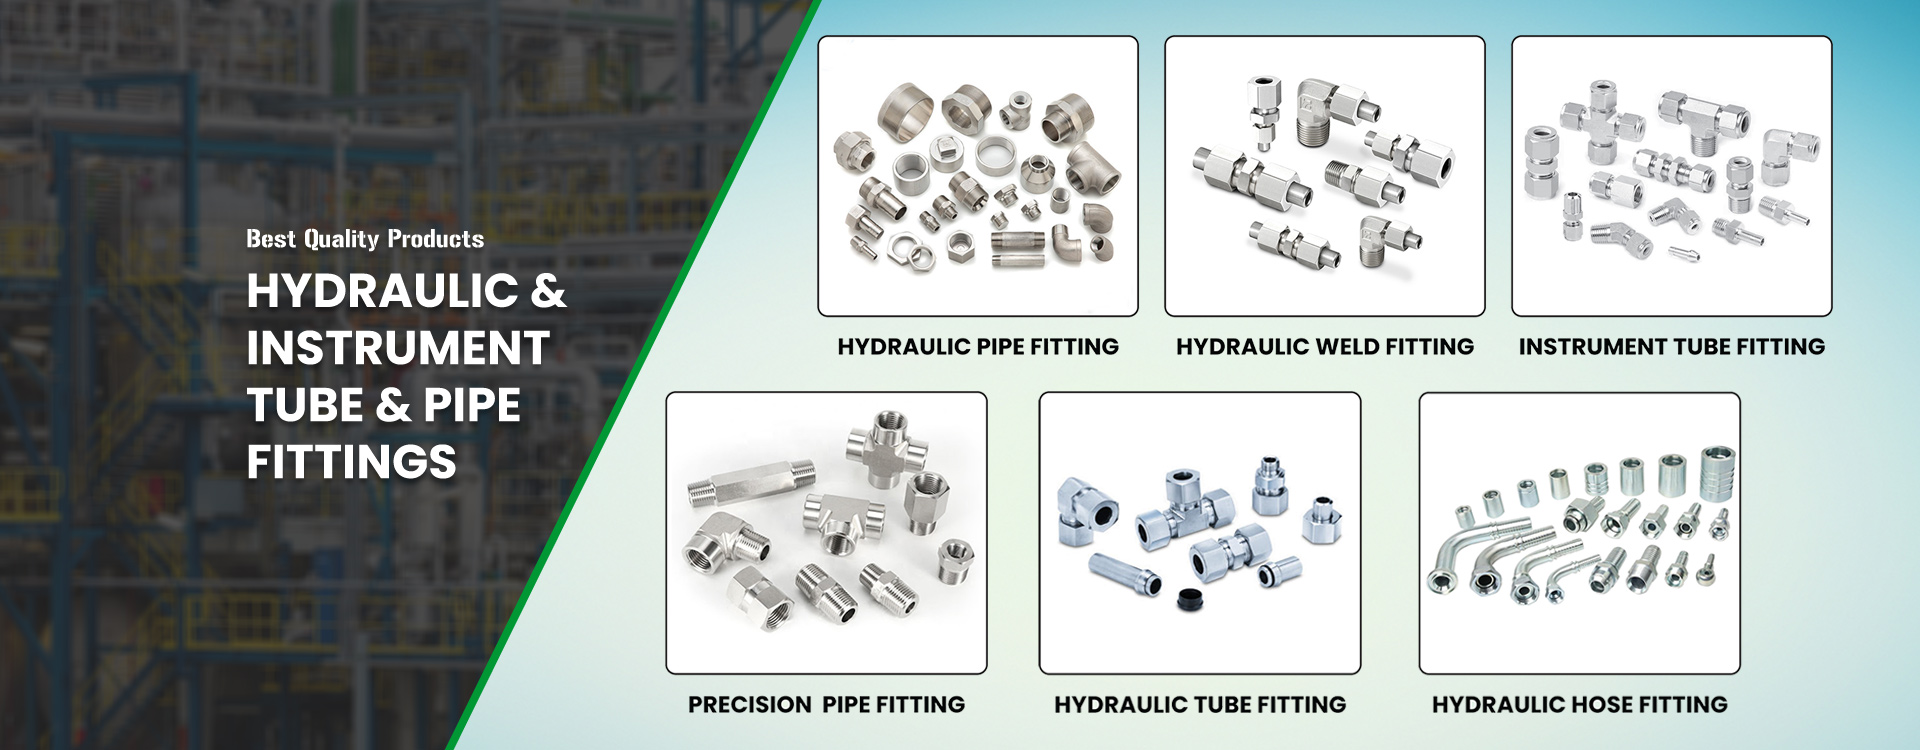 Hydraulic Instrument Tube Pipe Fittings at Best Price in India - Compression Fittings